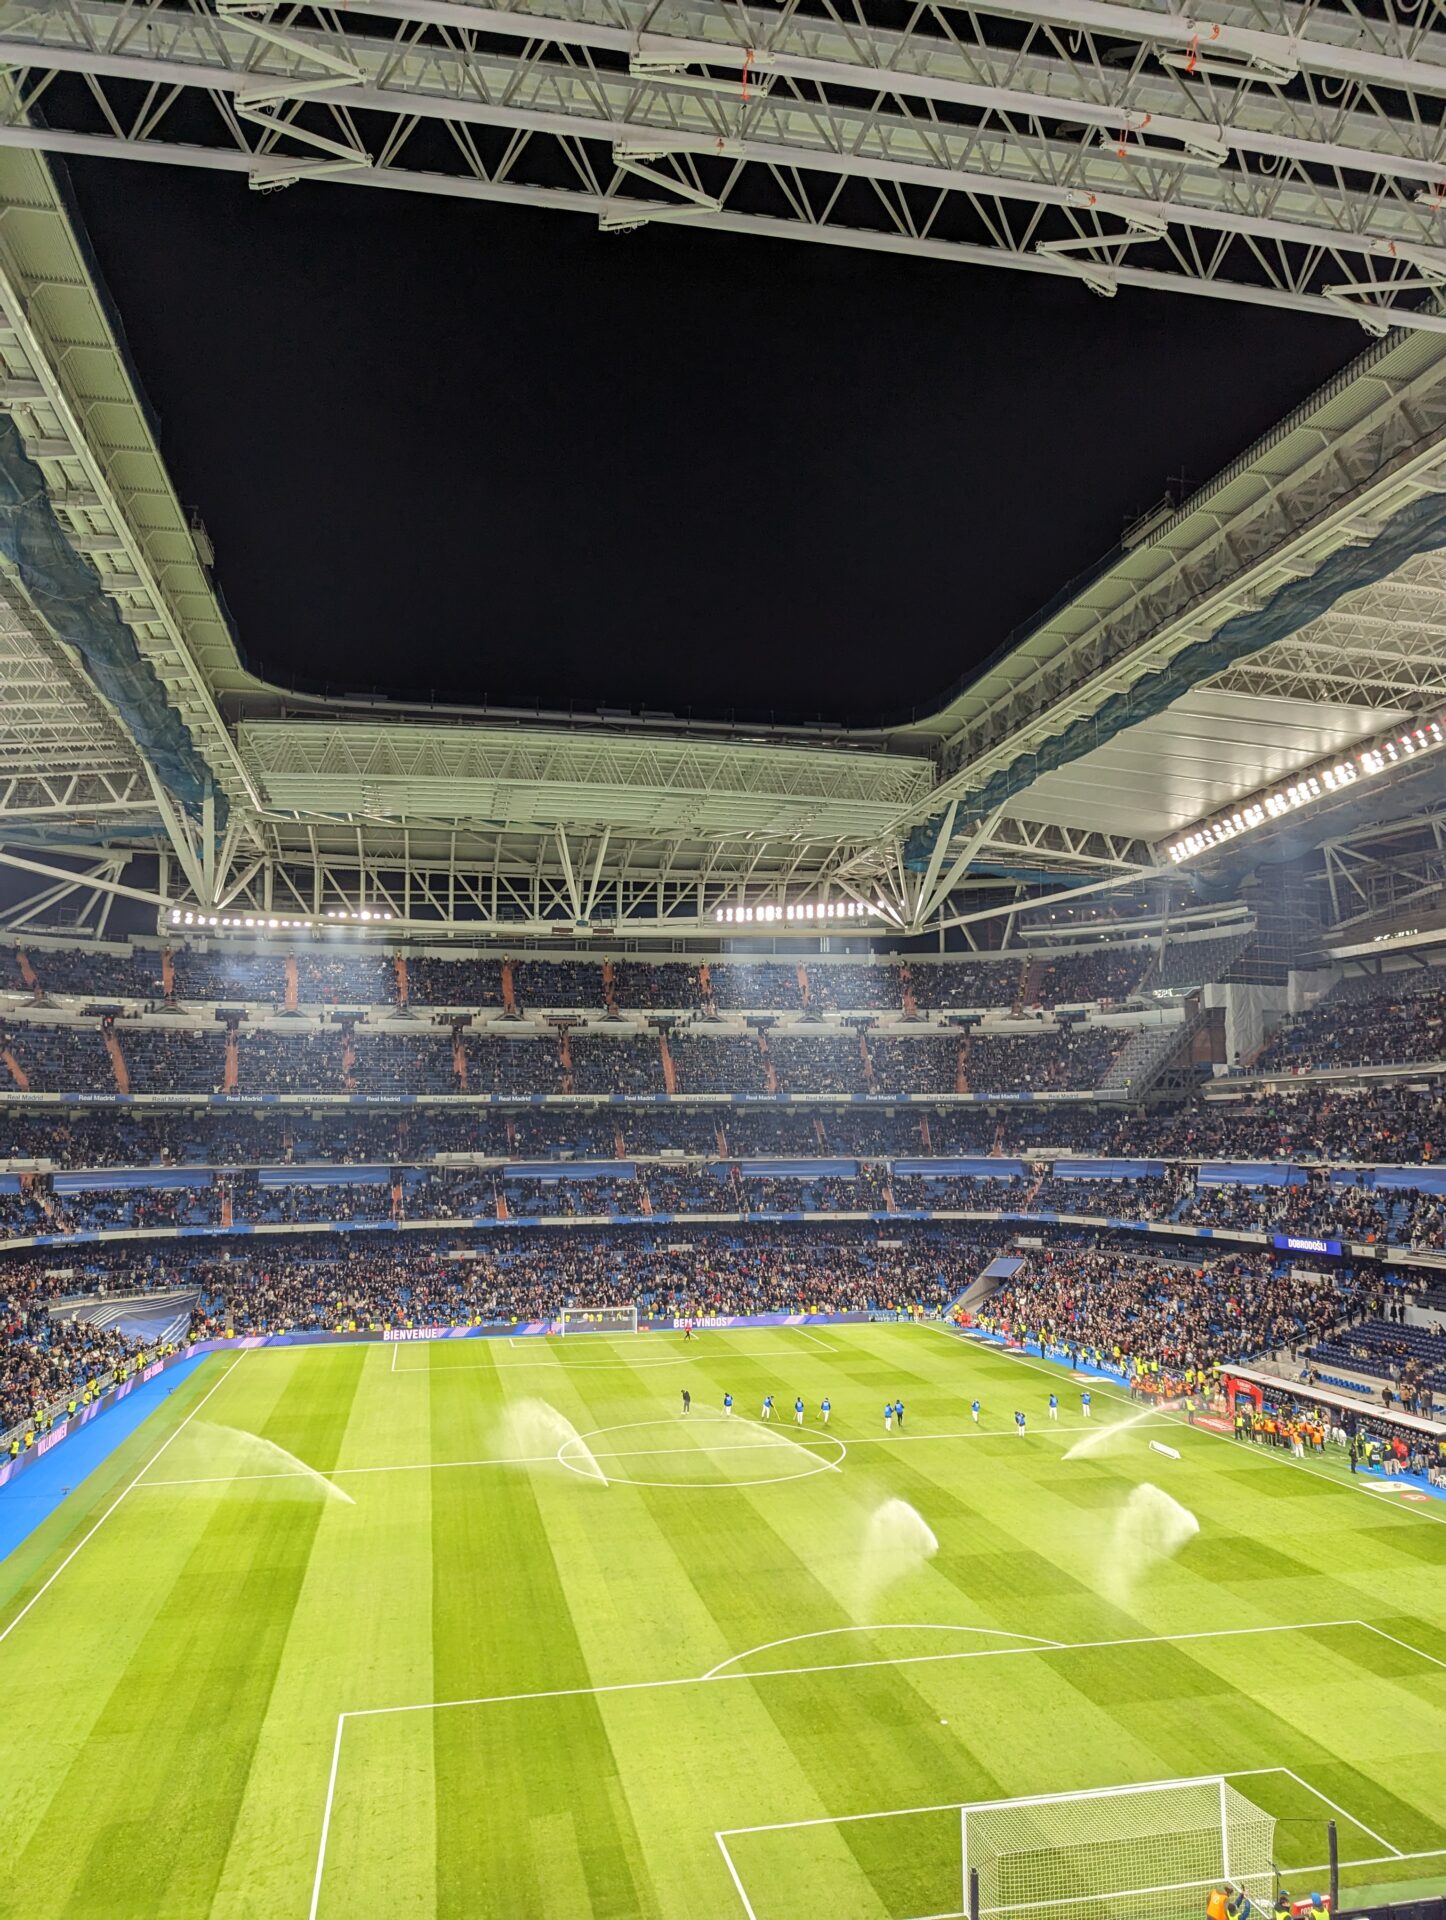 a football stadium with people in the stands